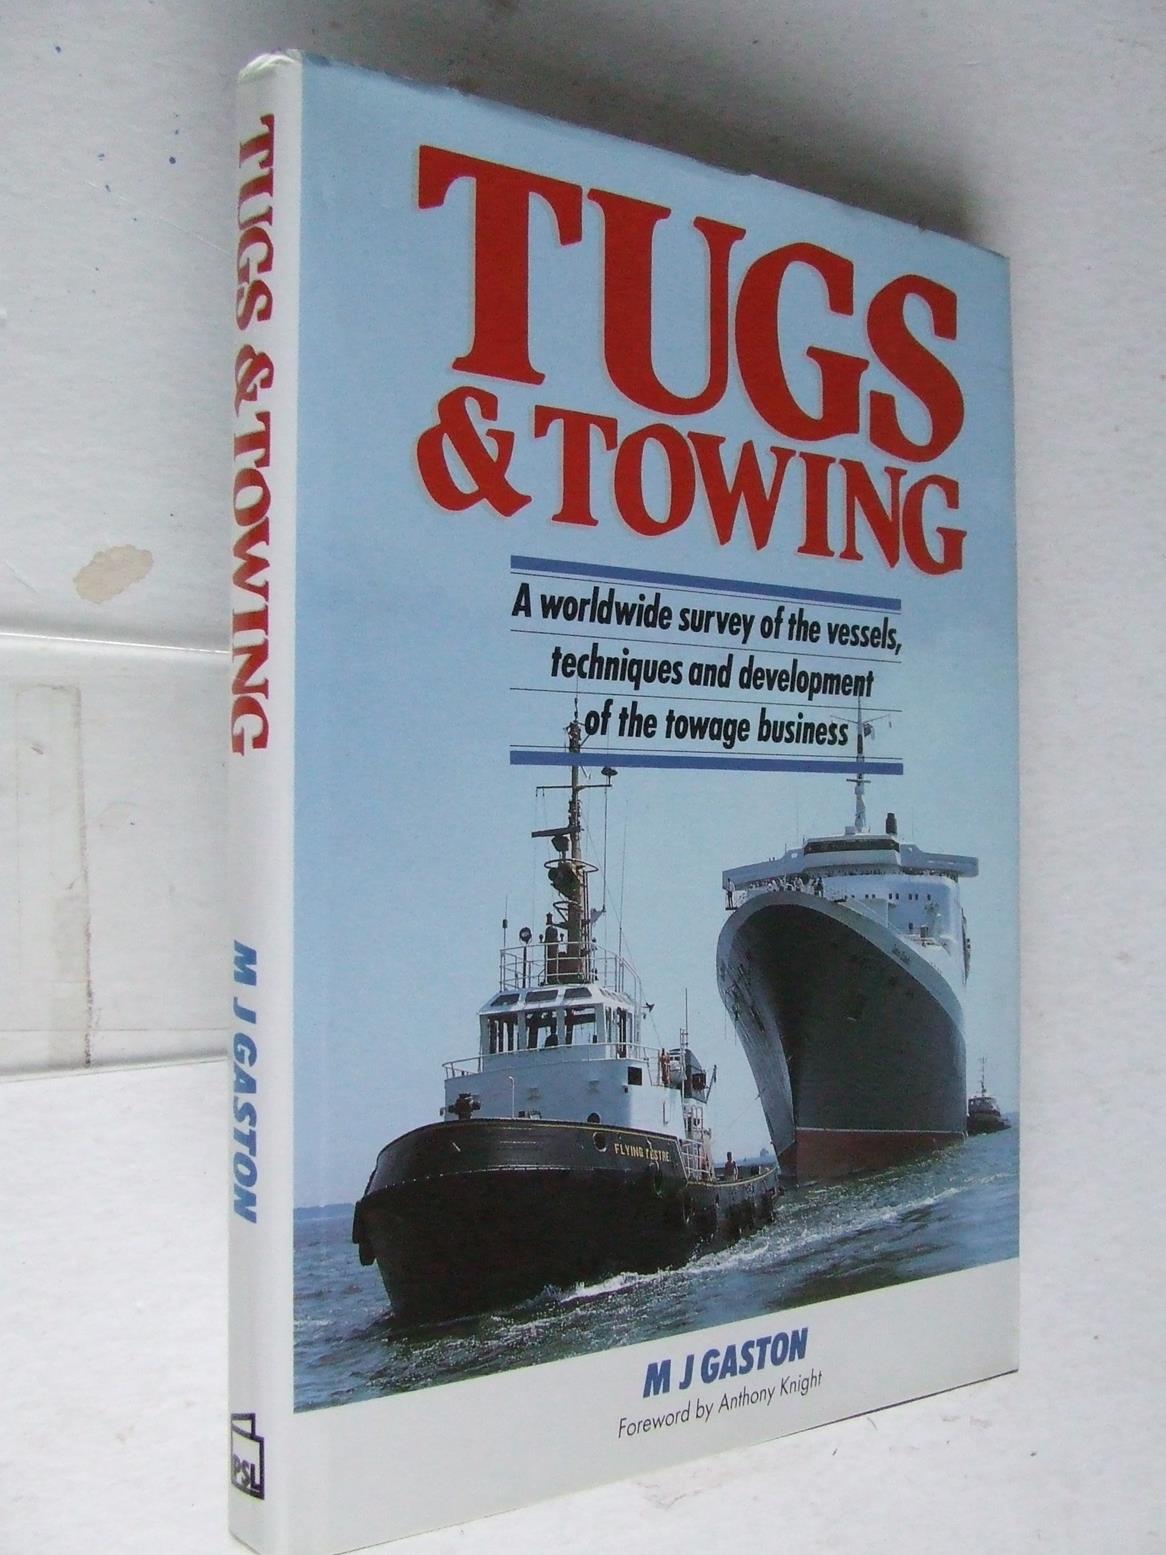 Tugs & Towing